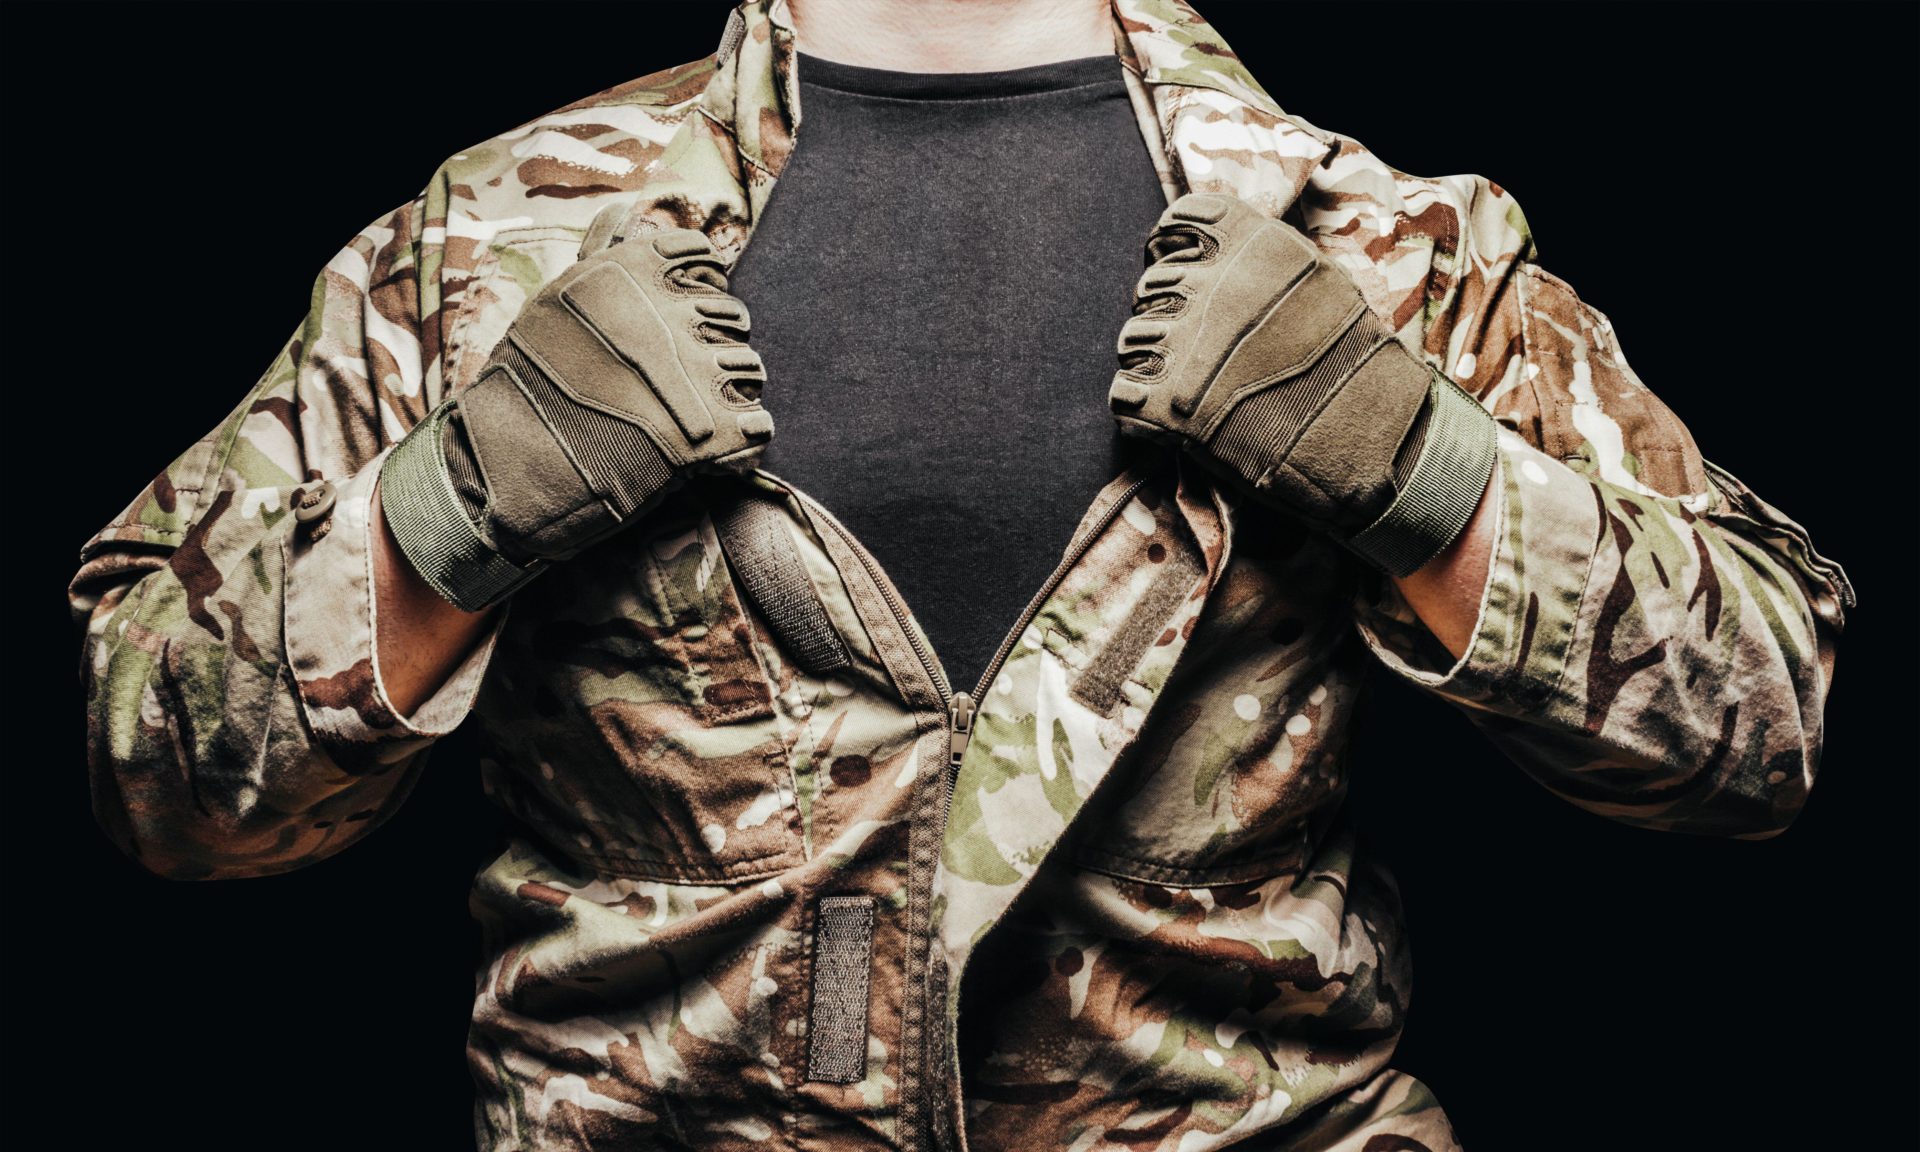 A soldier in ‘Multicam’ camouflage